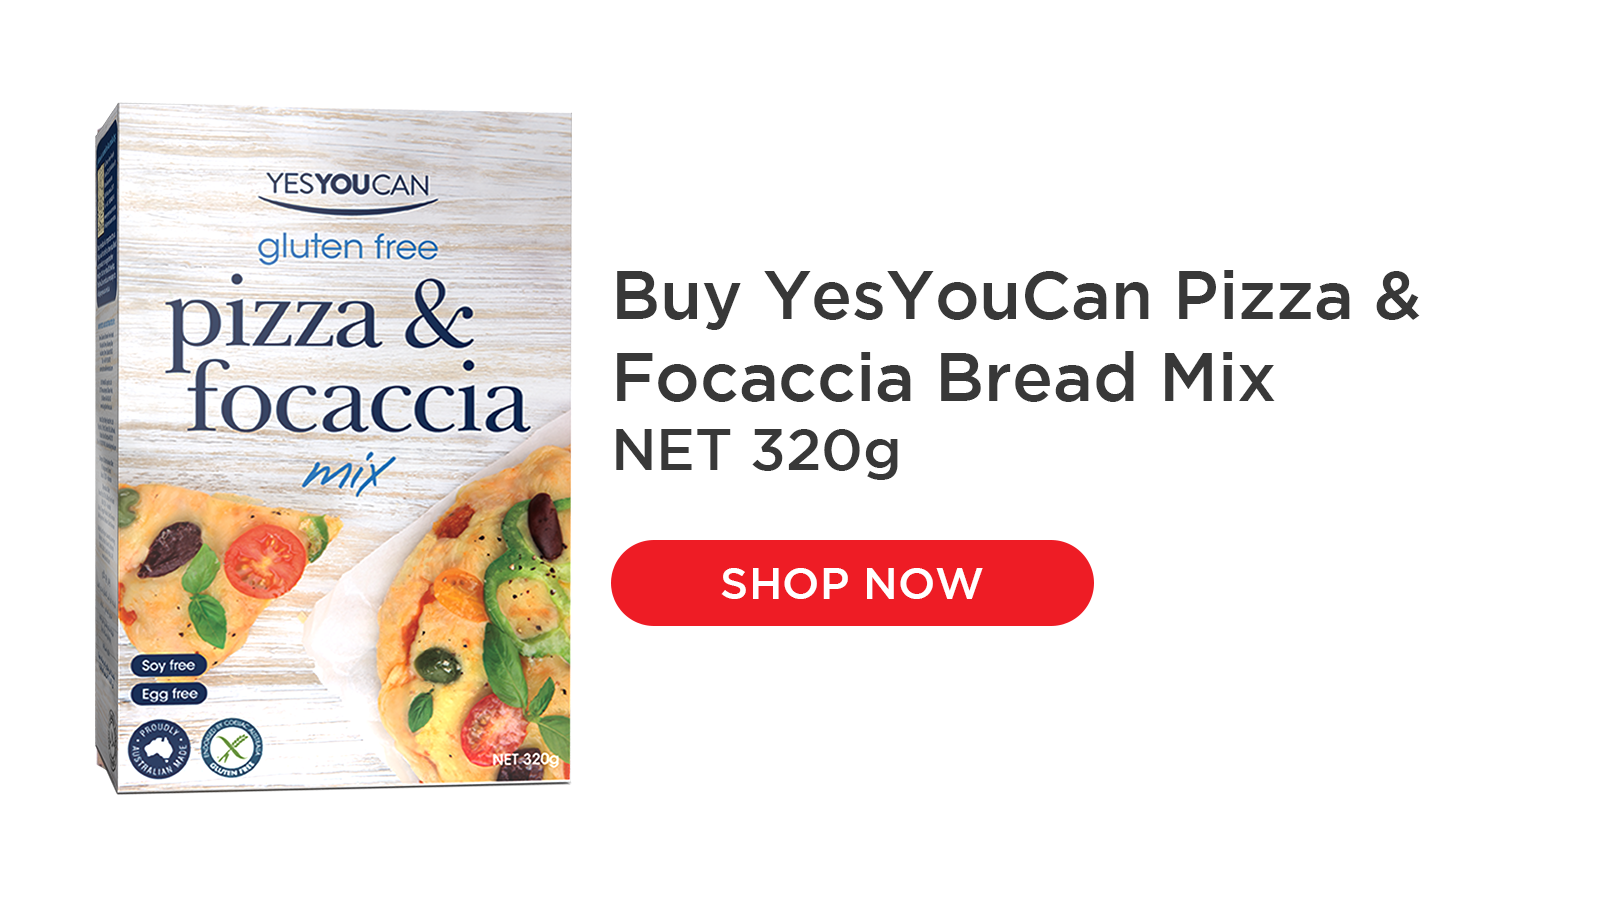 Use YesYouCan Pizza Mix to make fantastic tasting pizza bases to your preference, either thin and crispy or a thicker base. This carefully crafted mix delivers authentic taste and texture for delicious pizzas, just add your favourite toppings. Versatile mix for focaccia or other flat breads. 